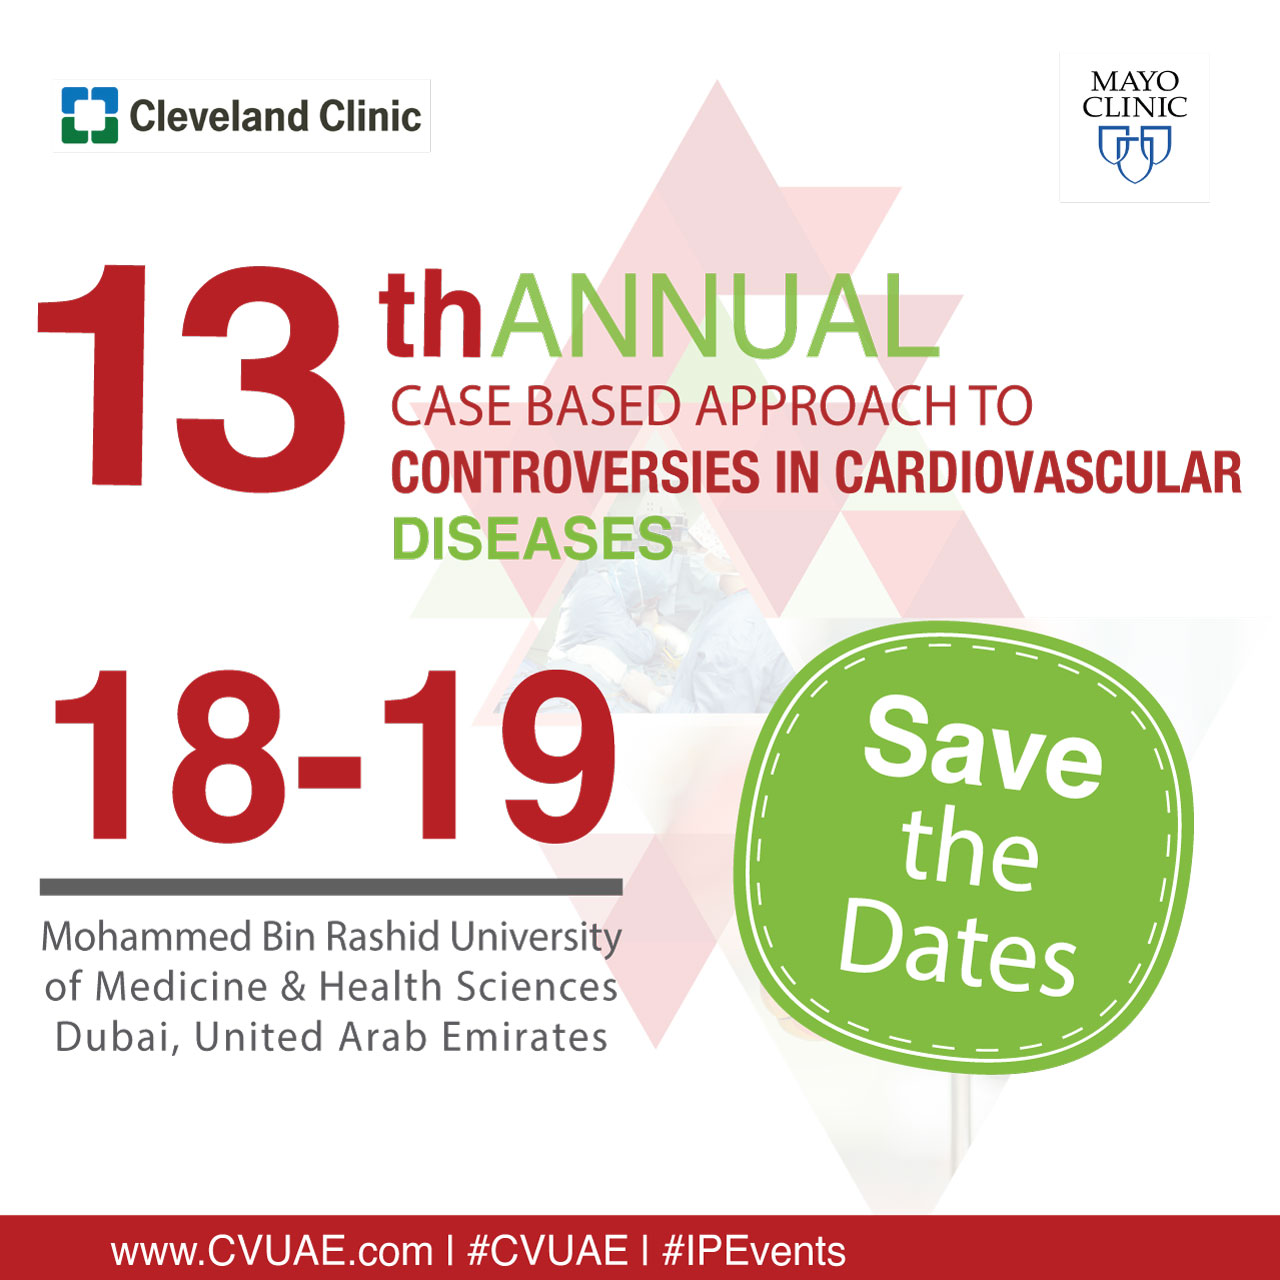 13th Annual Case-Based Approach to Controversies in Cardiovascular Diseases, Dubai, United Arab Emirates